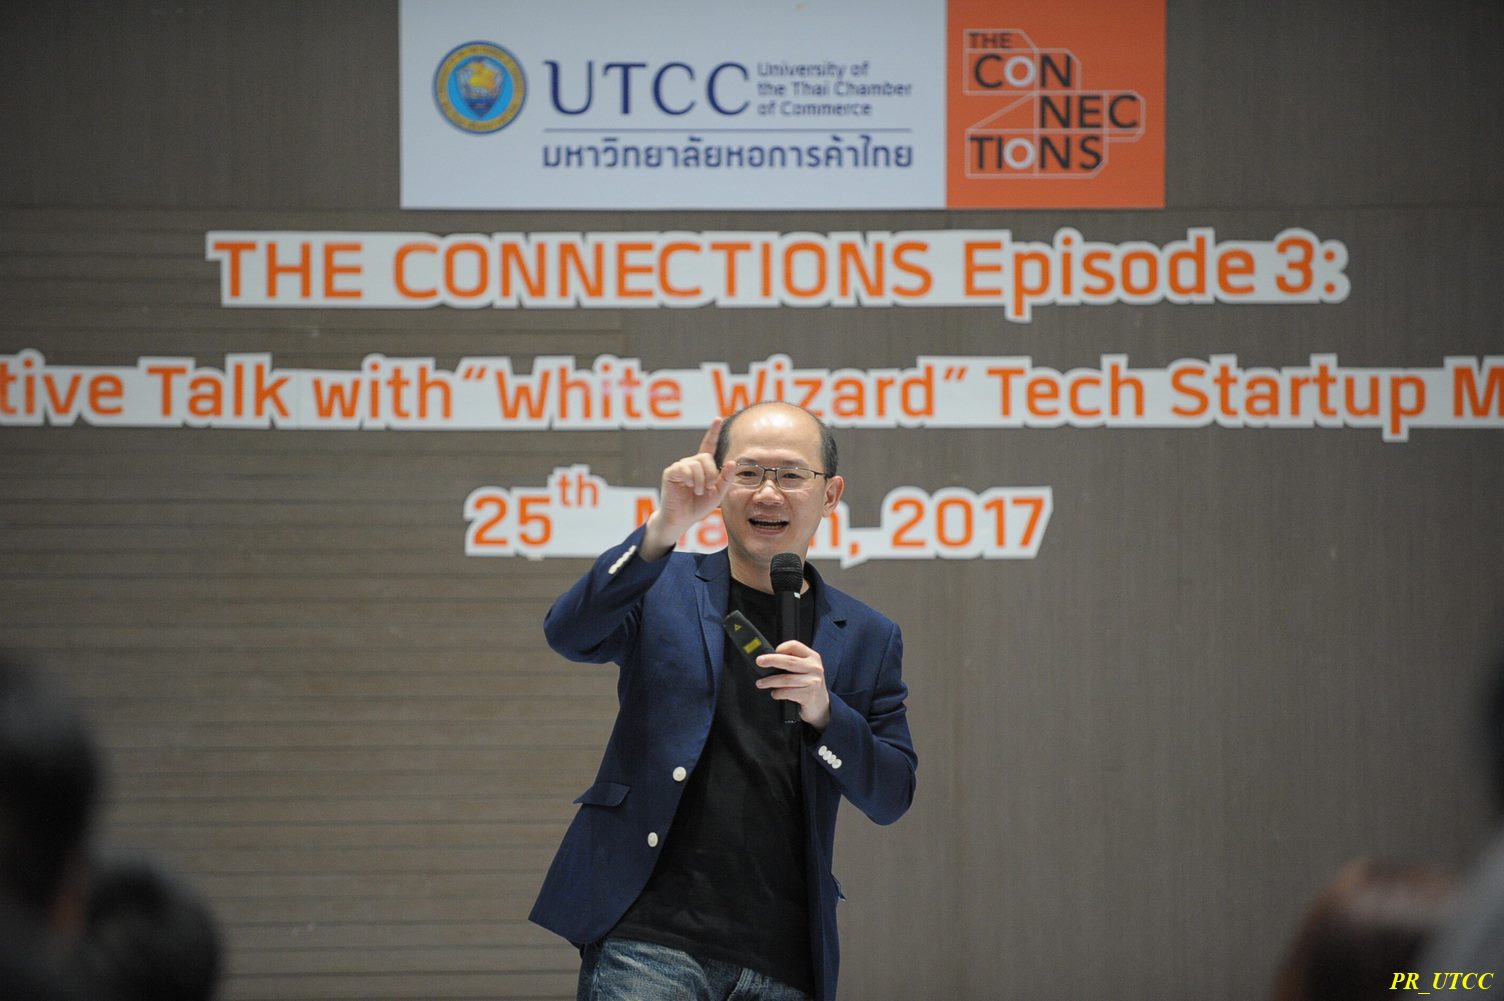 The Connections EP.3 Innovative talk with “White Wizard” The Tech Startup Master!